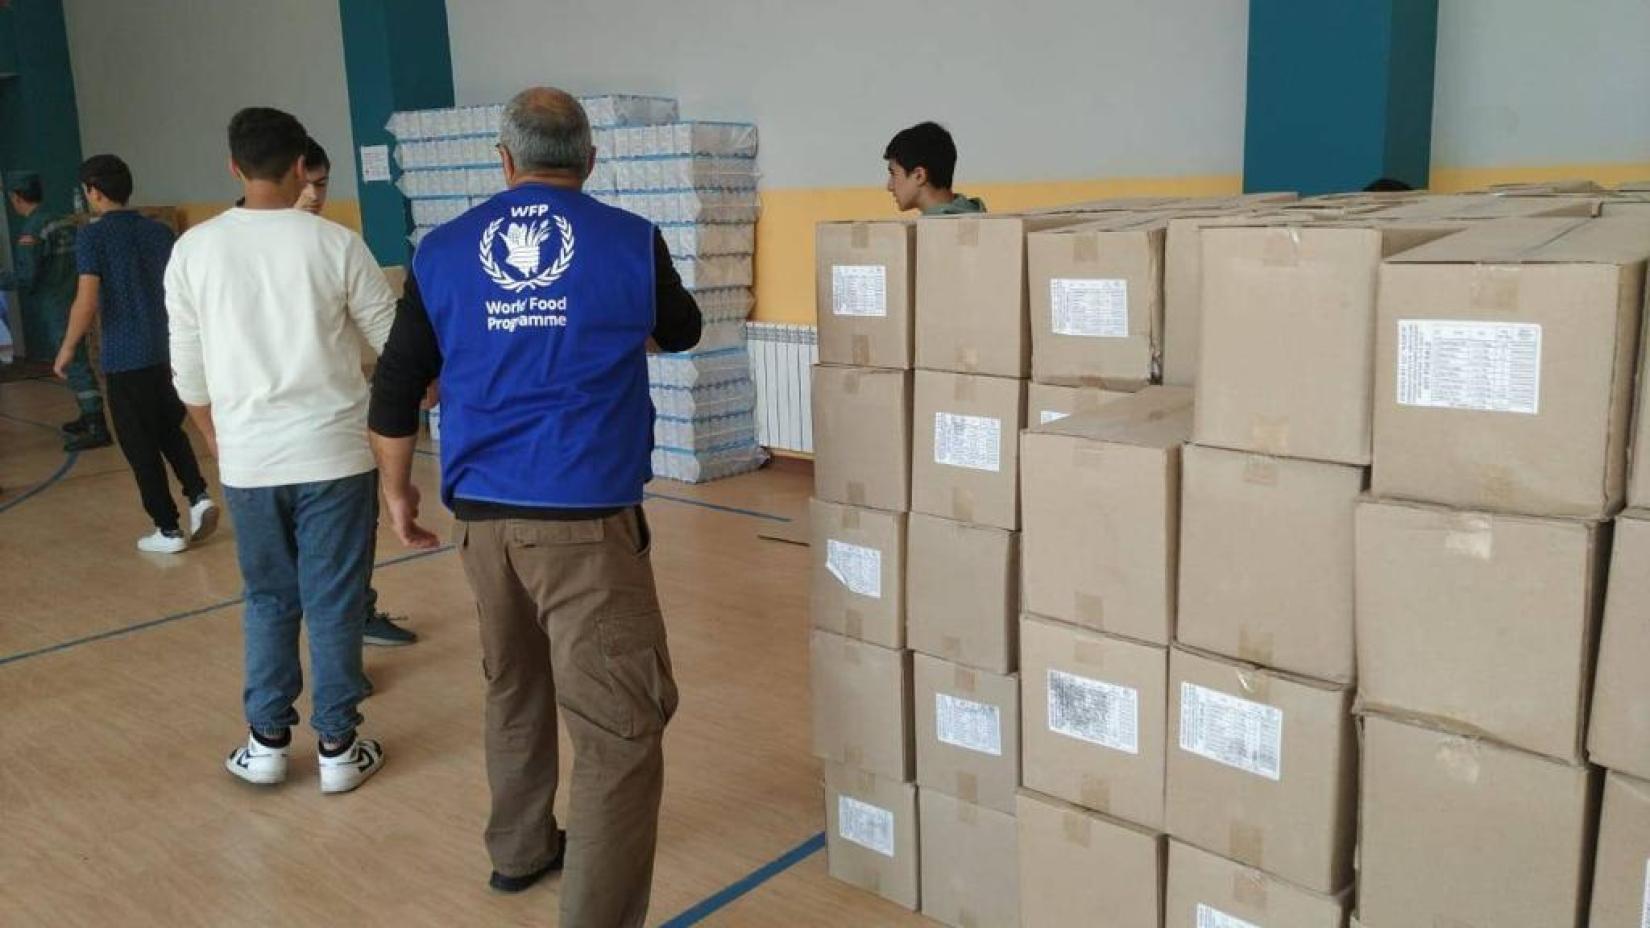 WFP Armenia staff distributing assistance to refugees.